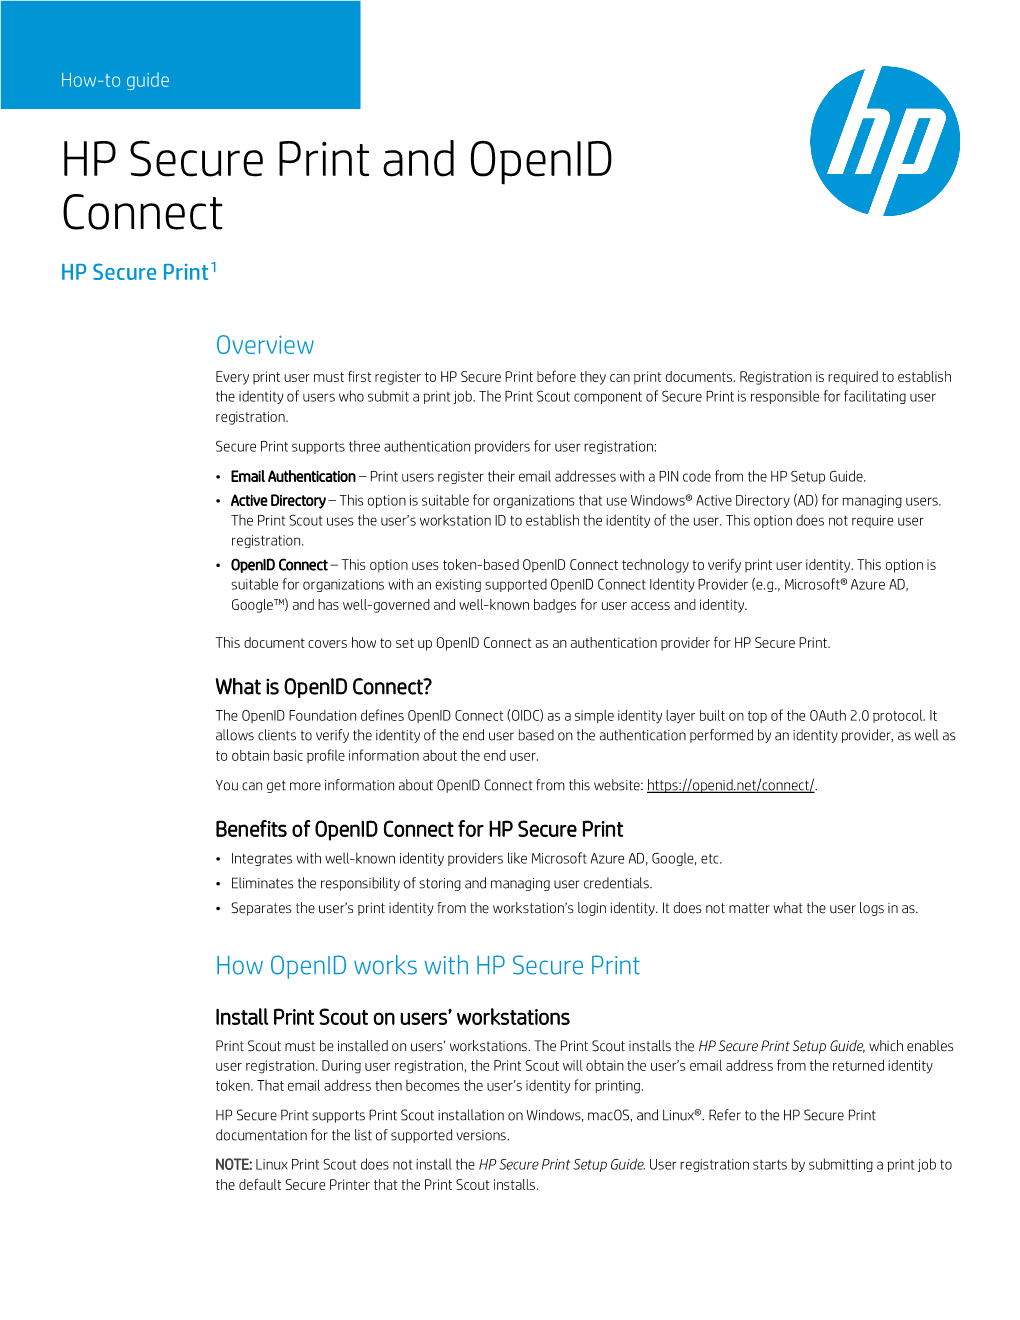 HP Secure Print and Openid Connect HP Secure Print1